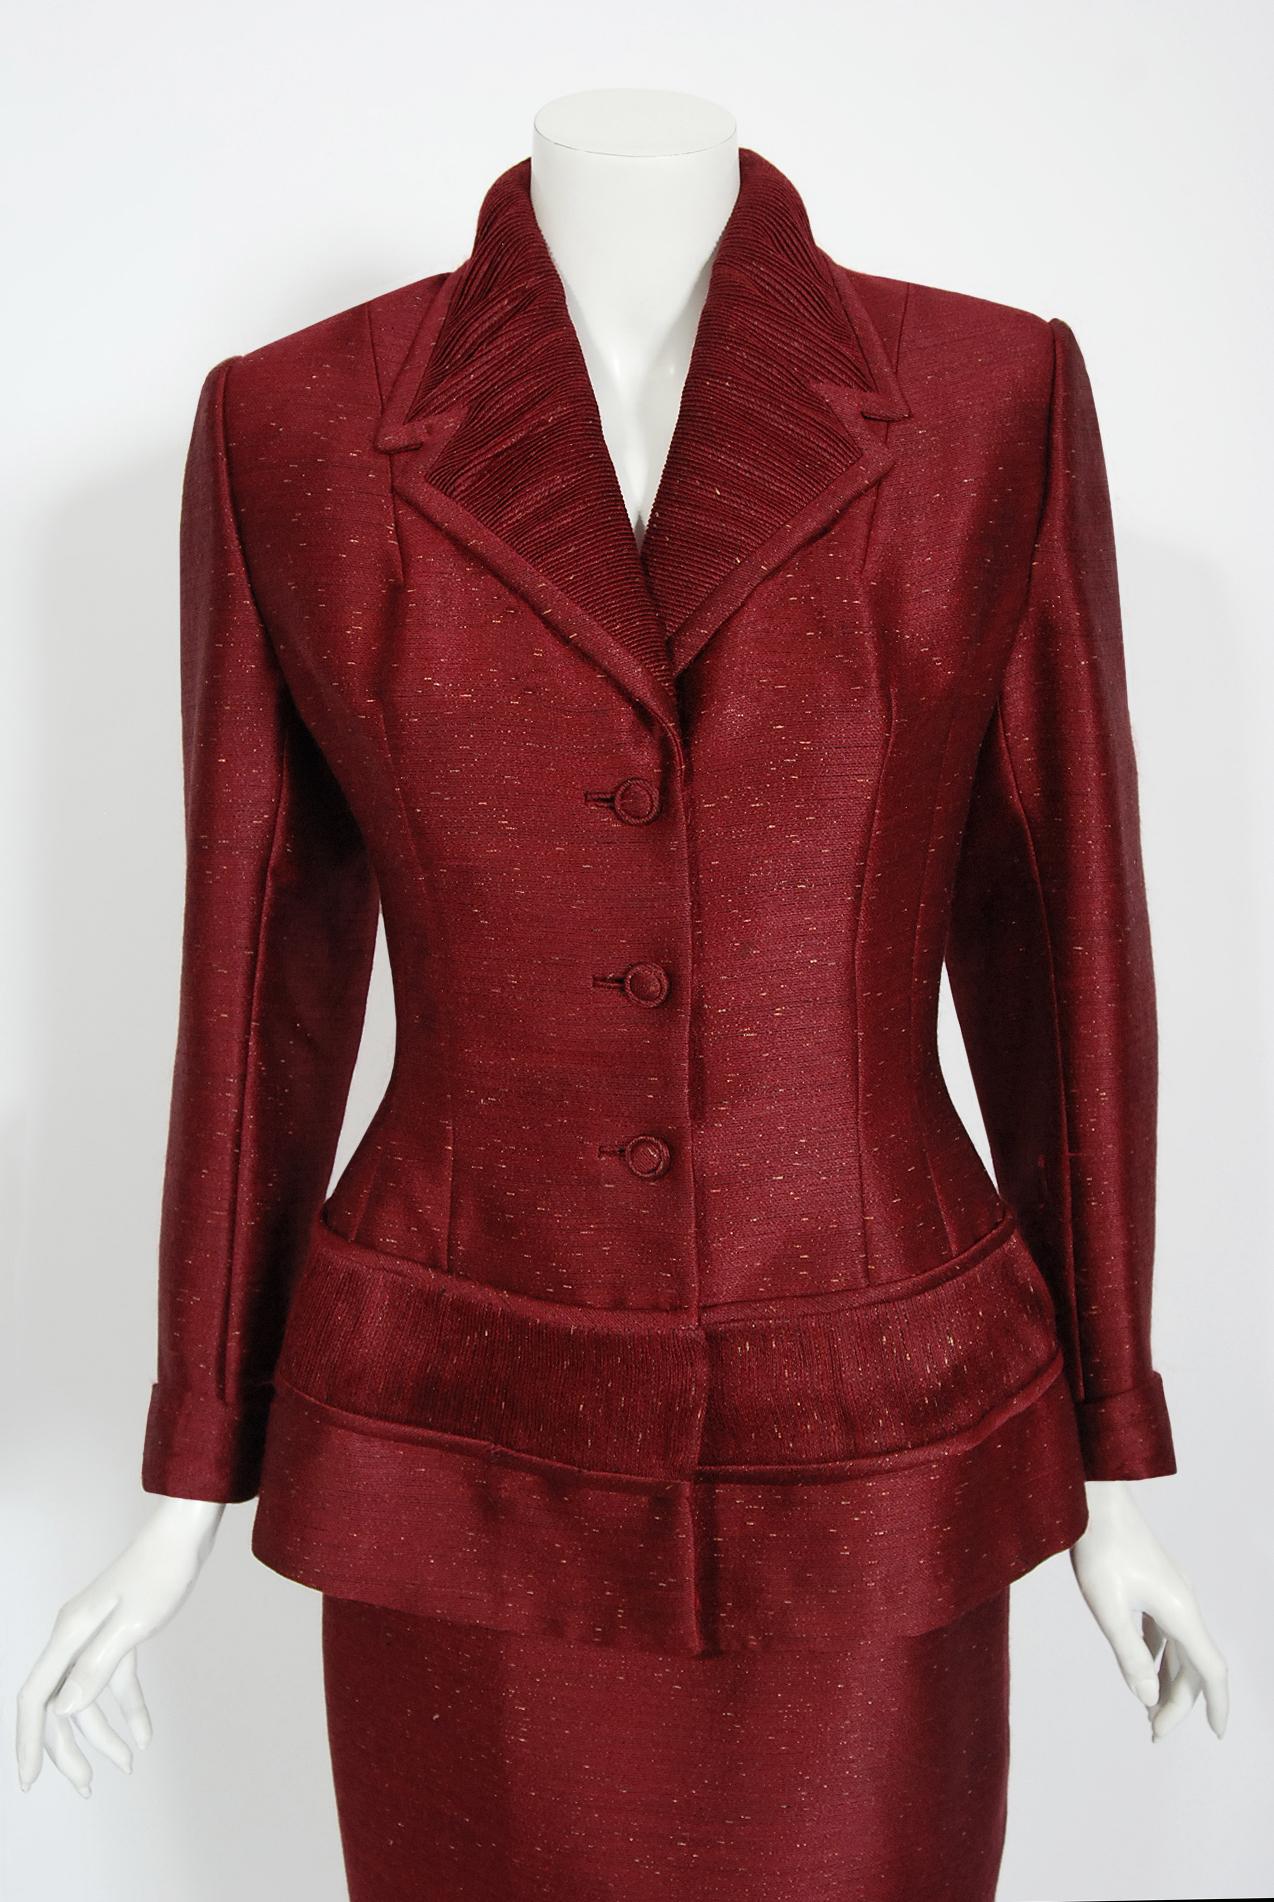 Gorgeous metallic merlot-red silk Lilli Ann suit dating back to their 1954 collection. Lilli Ann was started in San Francisco in 1933 by Adolph Schuman, naming his company for his wife, Lillian. The company became known for their beautiful,